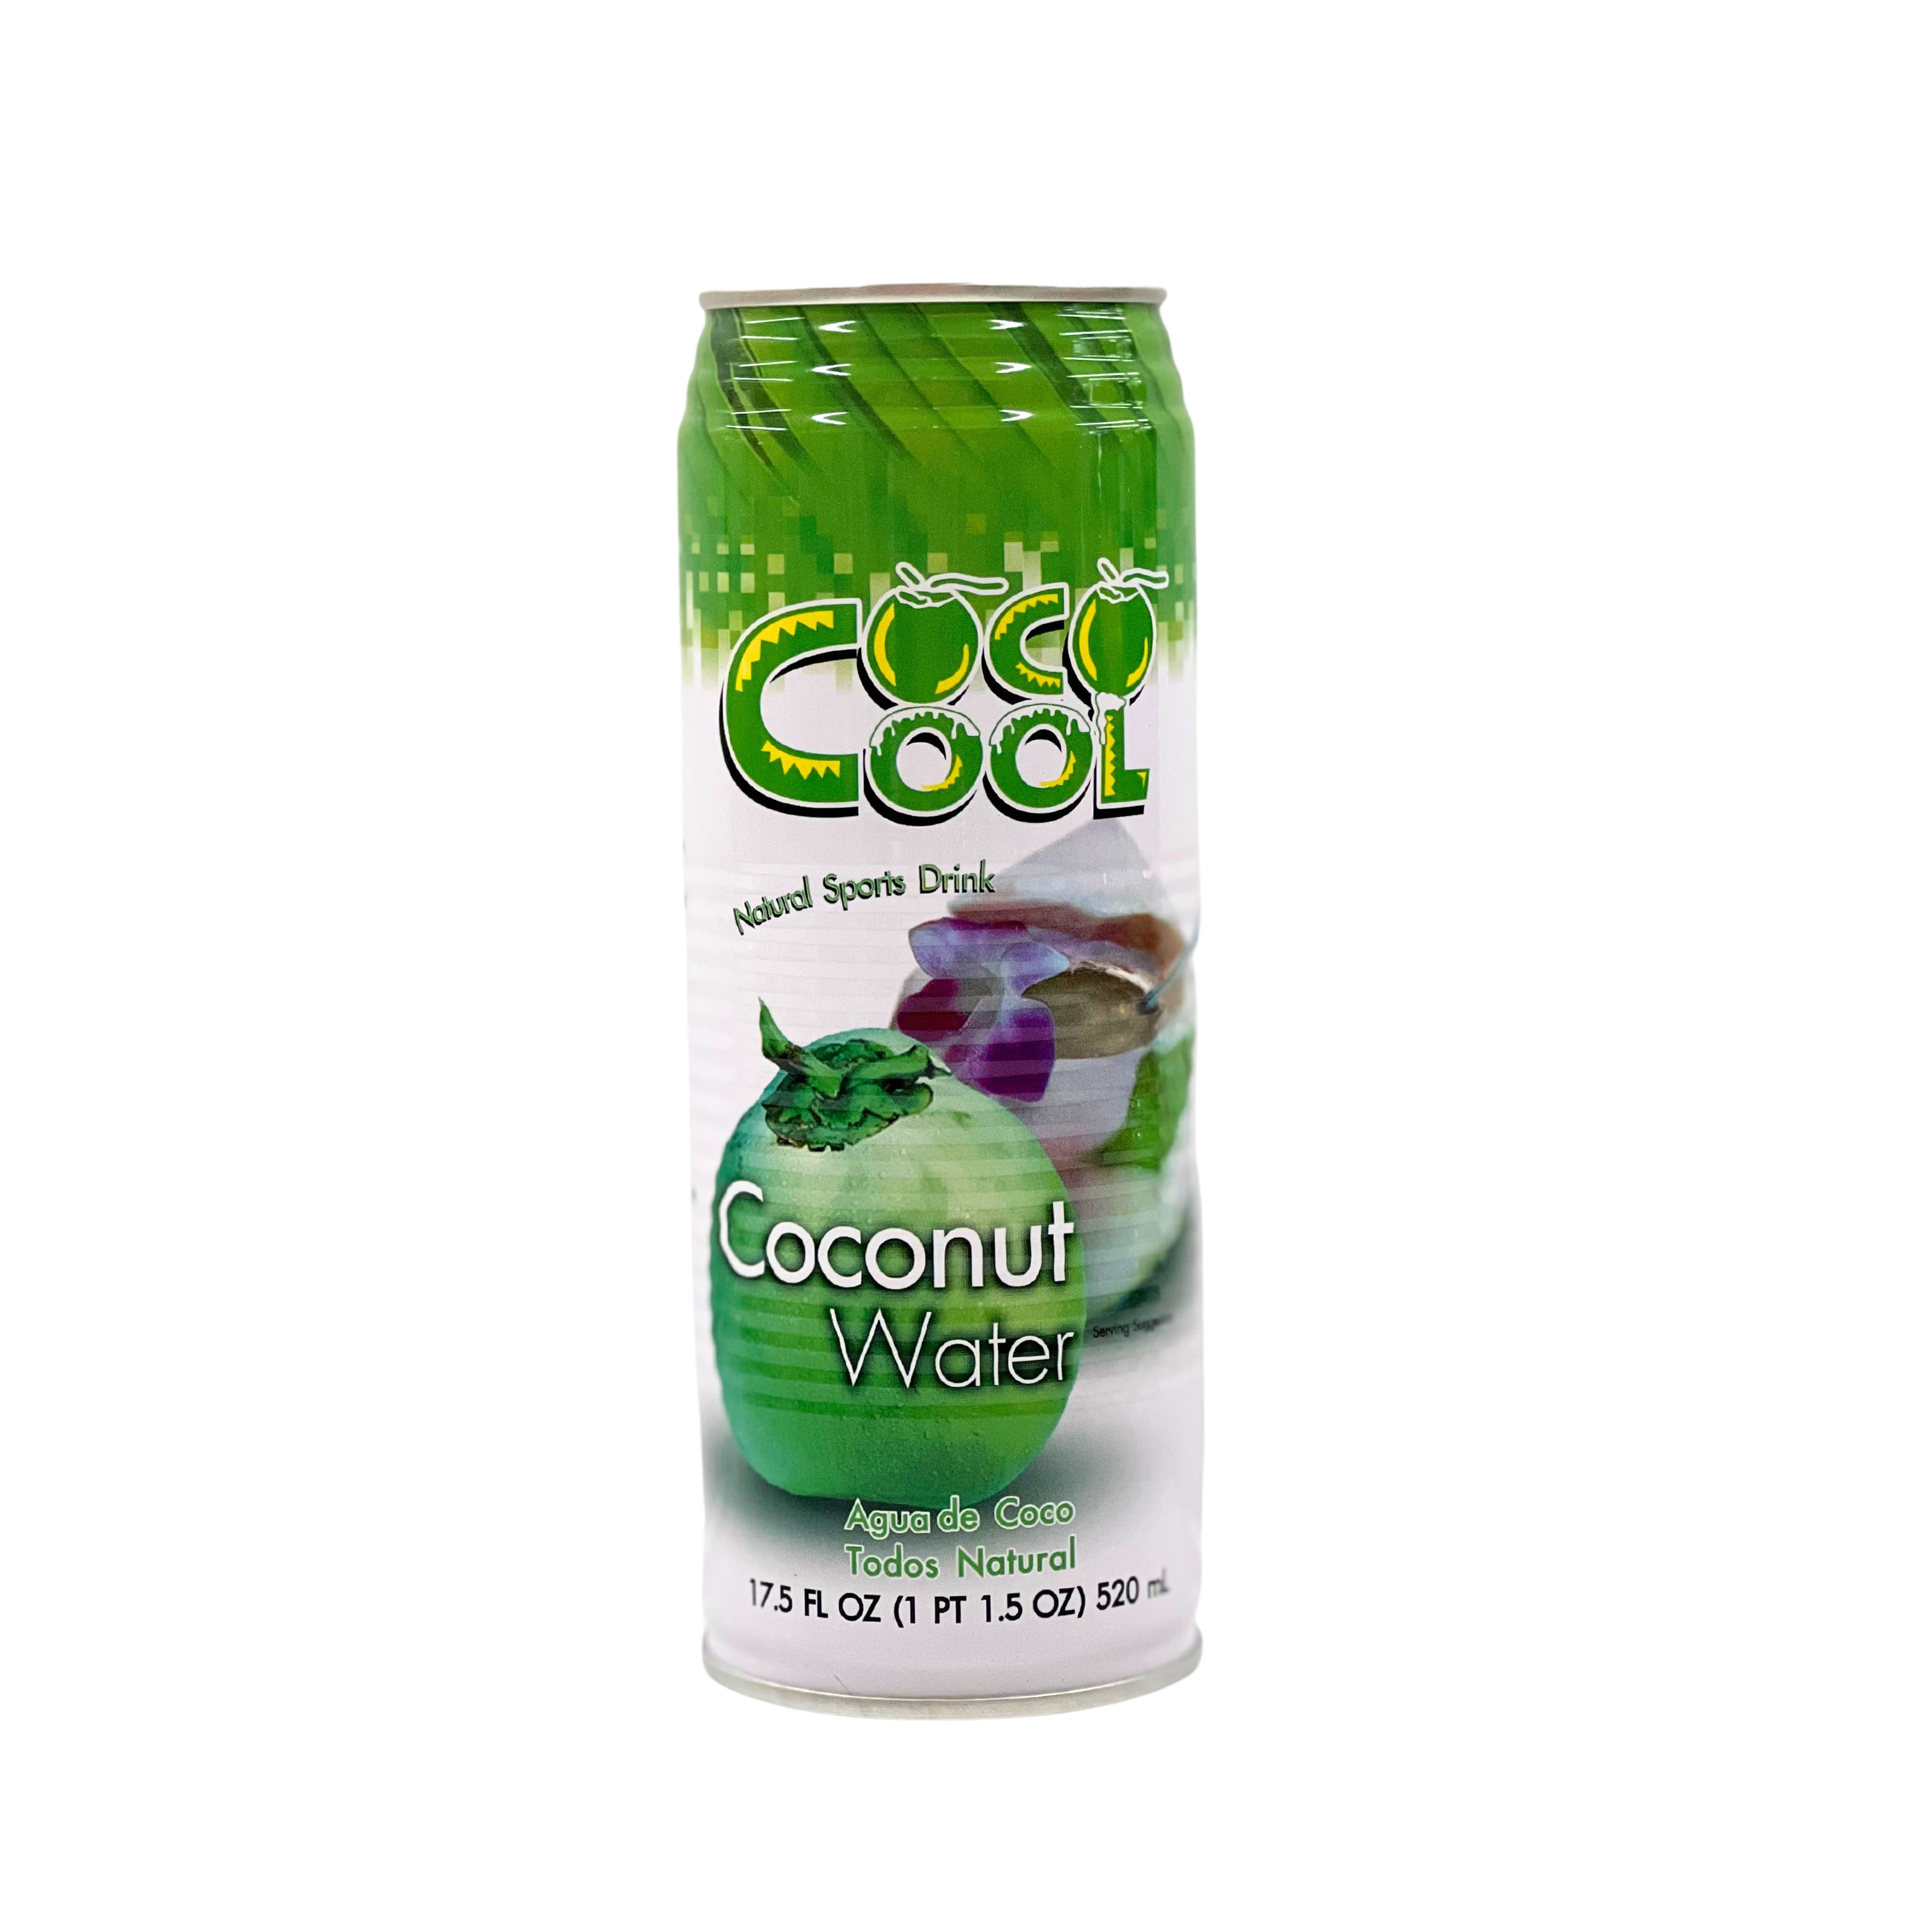 Coco Cool Coconut Water 520ml